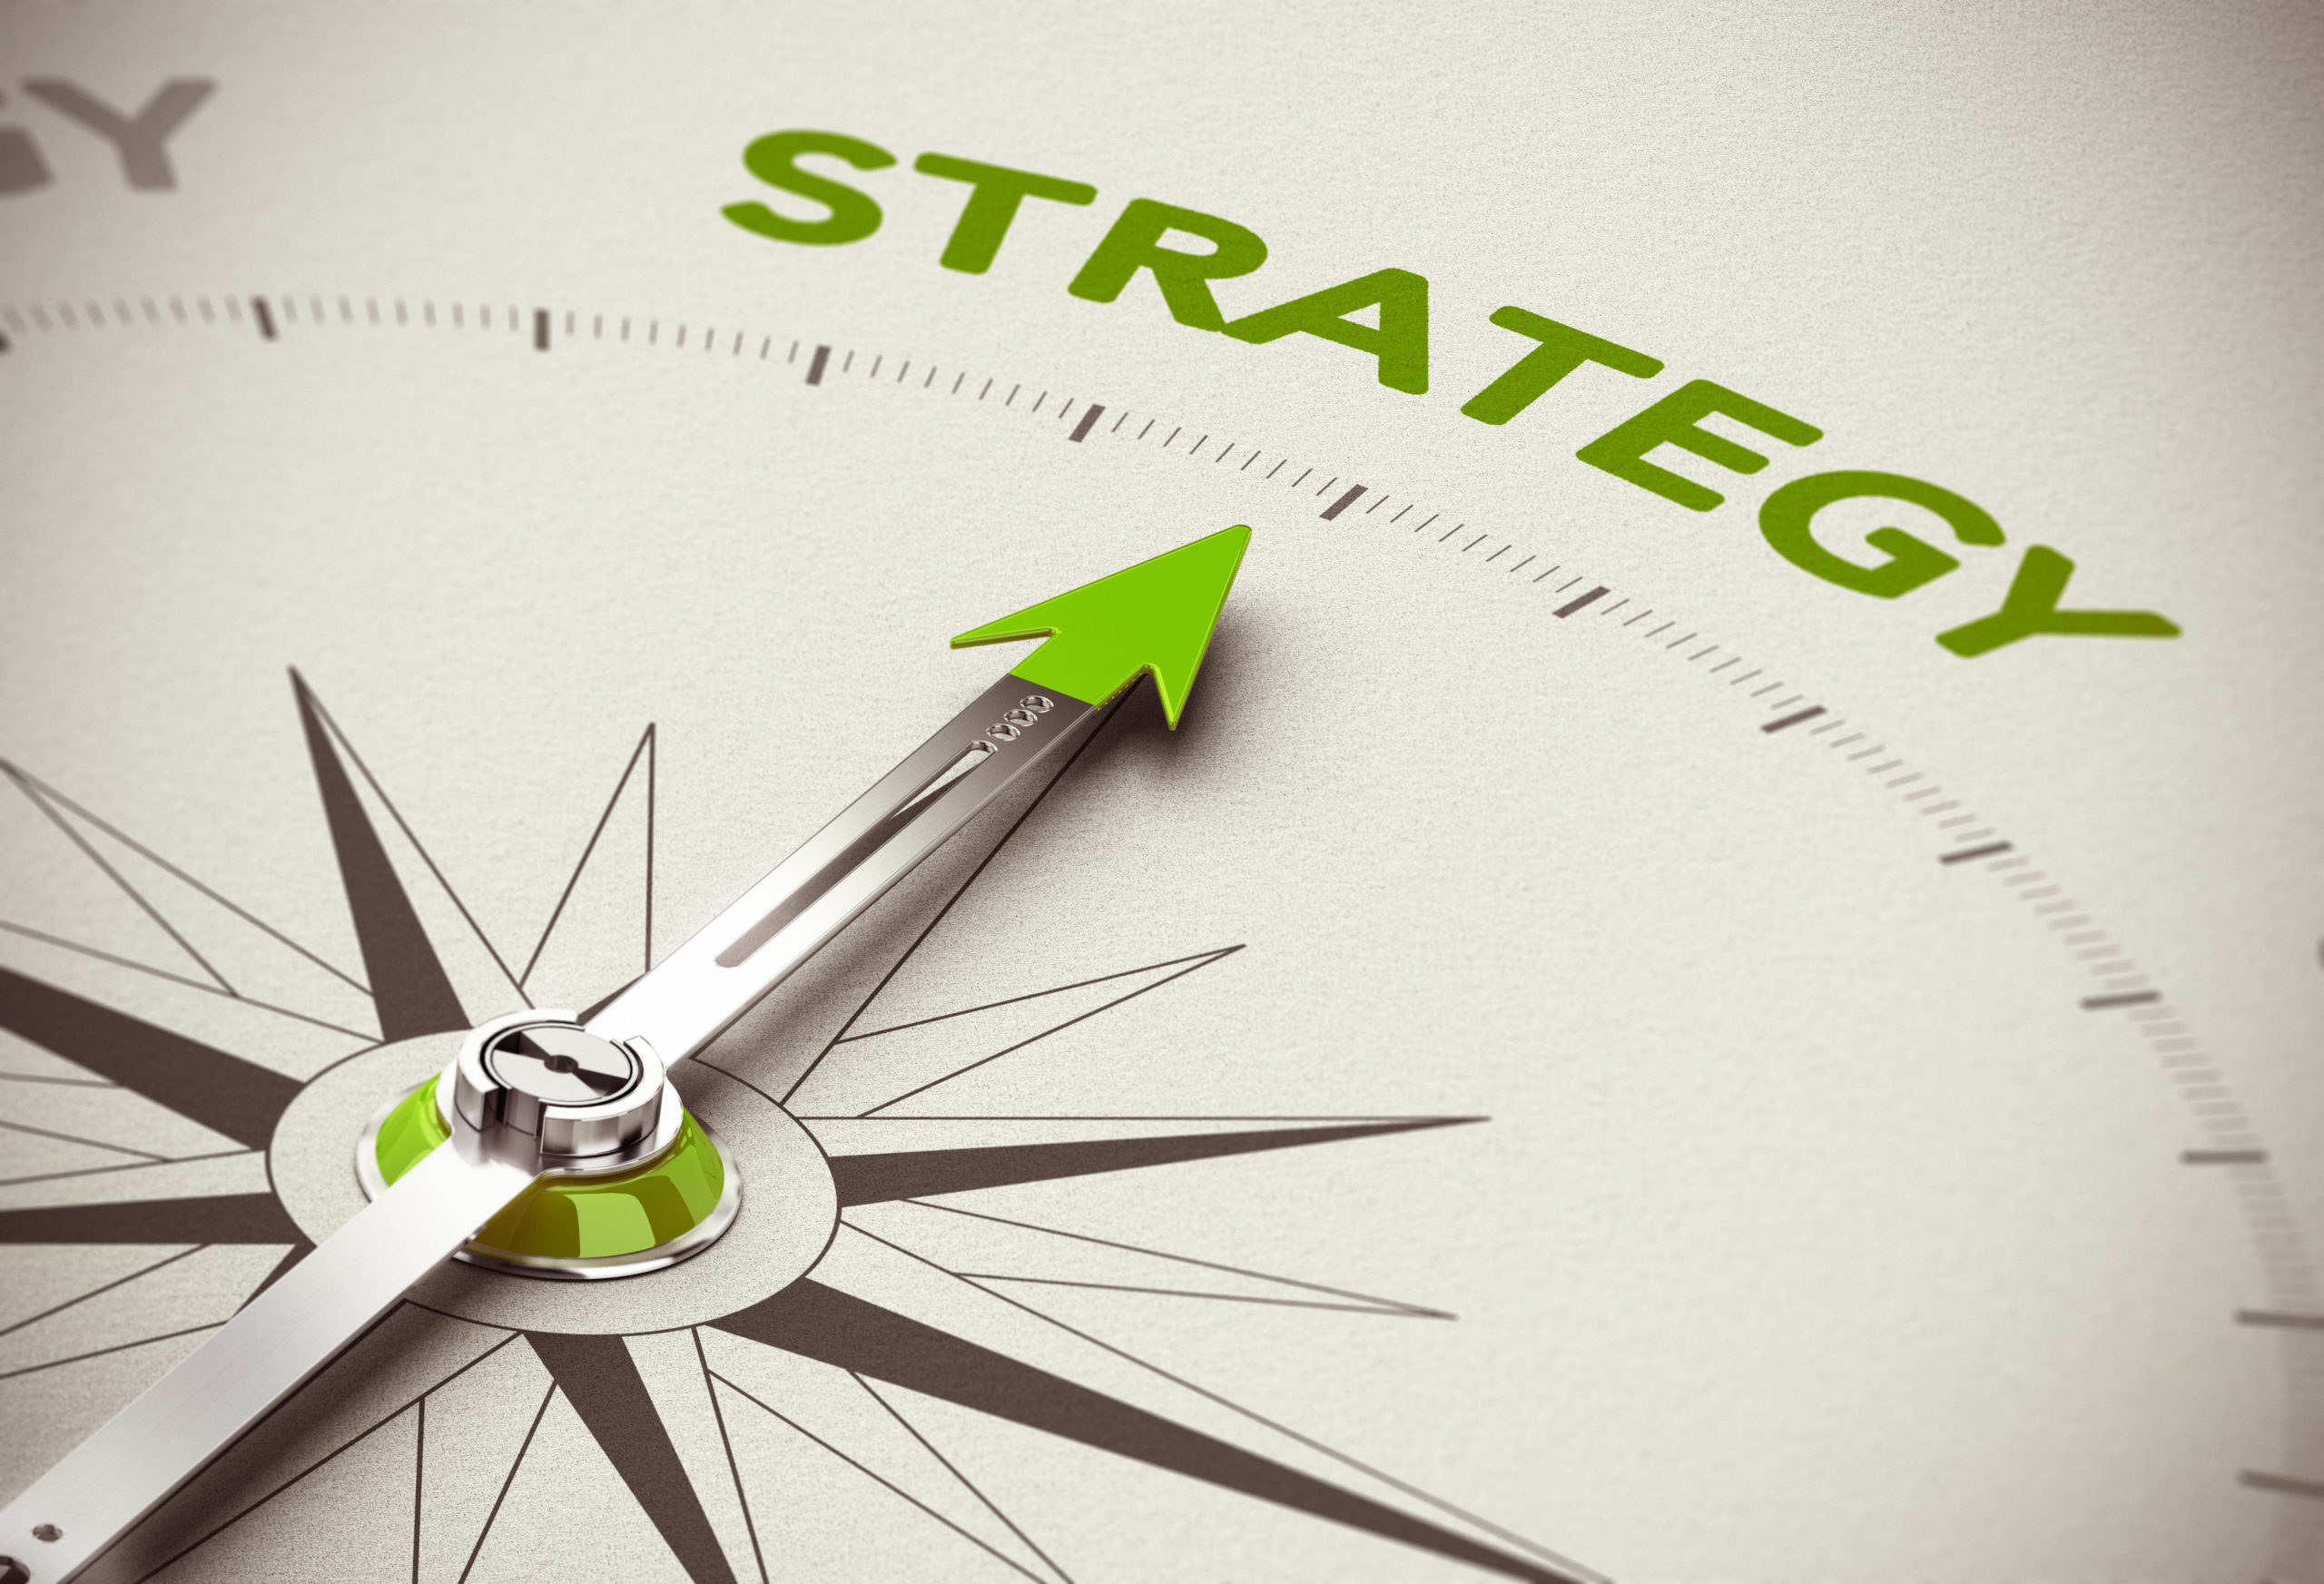 5 Steps to Finding the Right Options Strategy